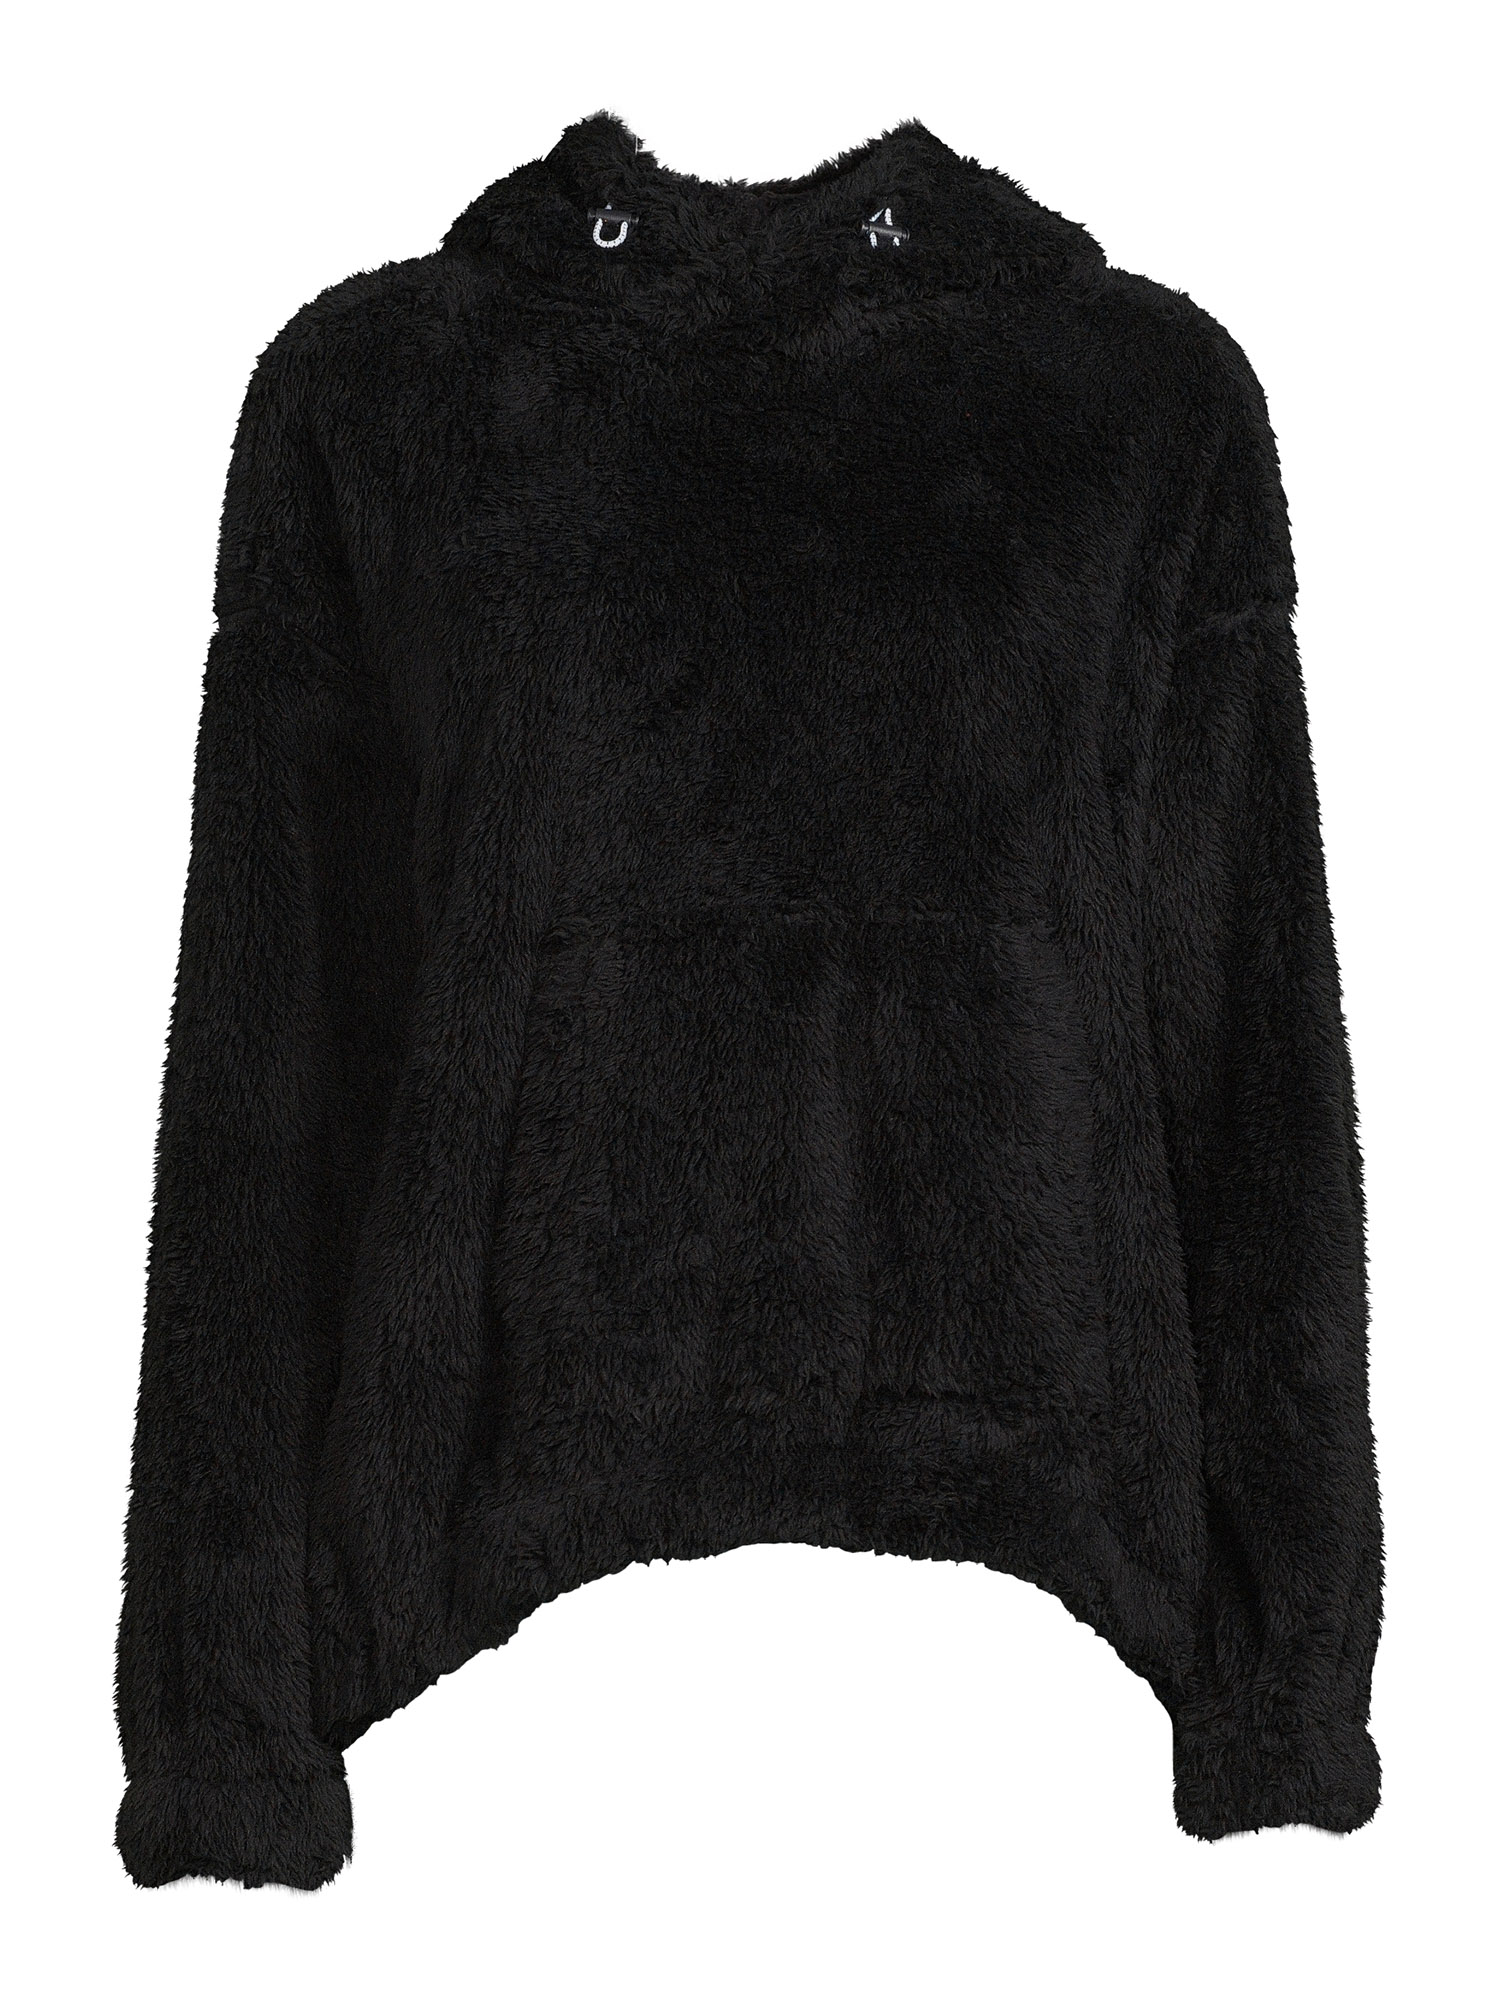 Athletic Works Women's Faux Sherpa Pullover Hoodie - image 5 of 5